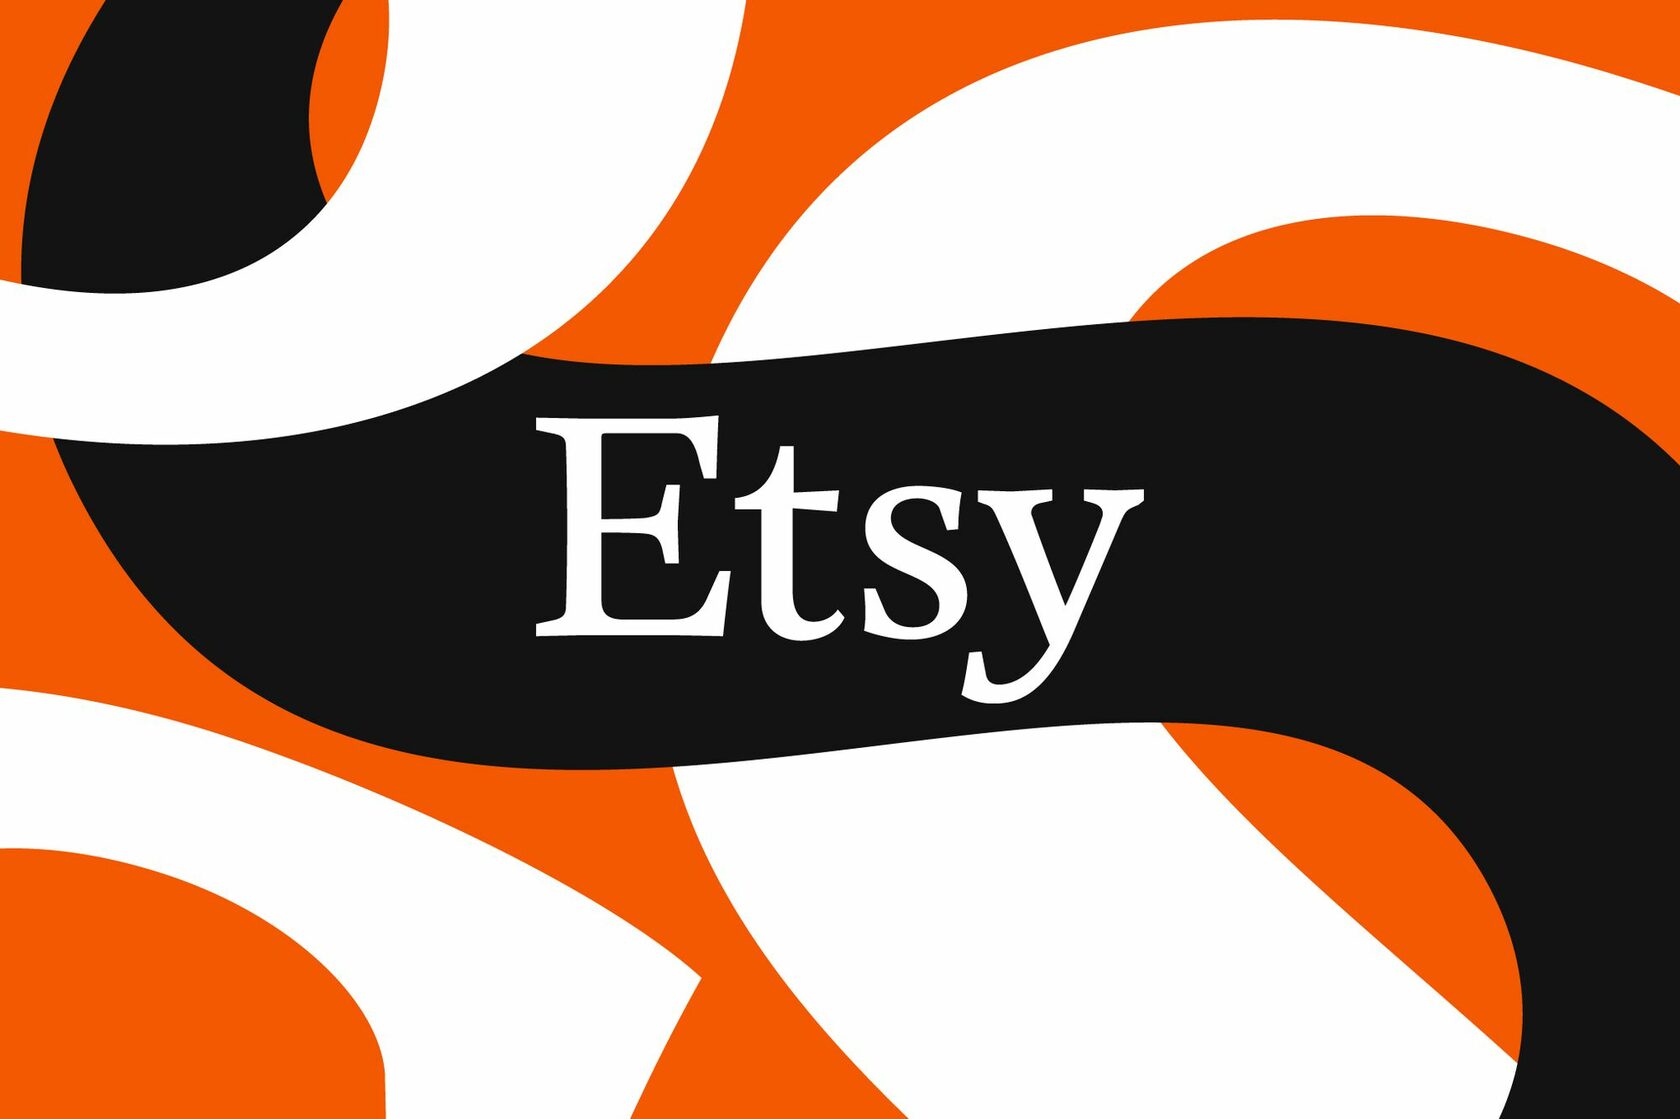 Explore how Etsy, a renowned e-commerce platform, leverages Artificial Intelligence for enhanced user experiences. Discover its steady financial performance and international expansion strategies. Dive into the world of US stocks and investment tips on ProfitsForce.com.